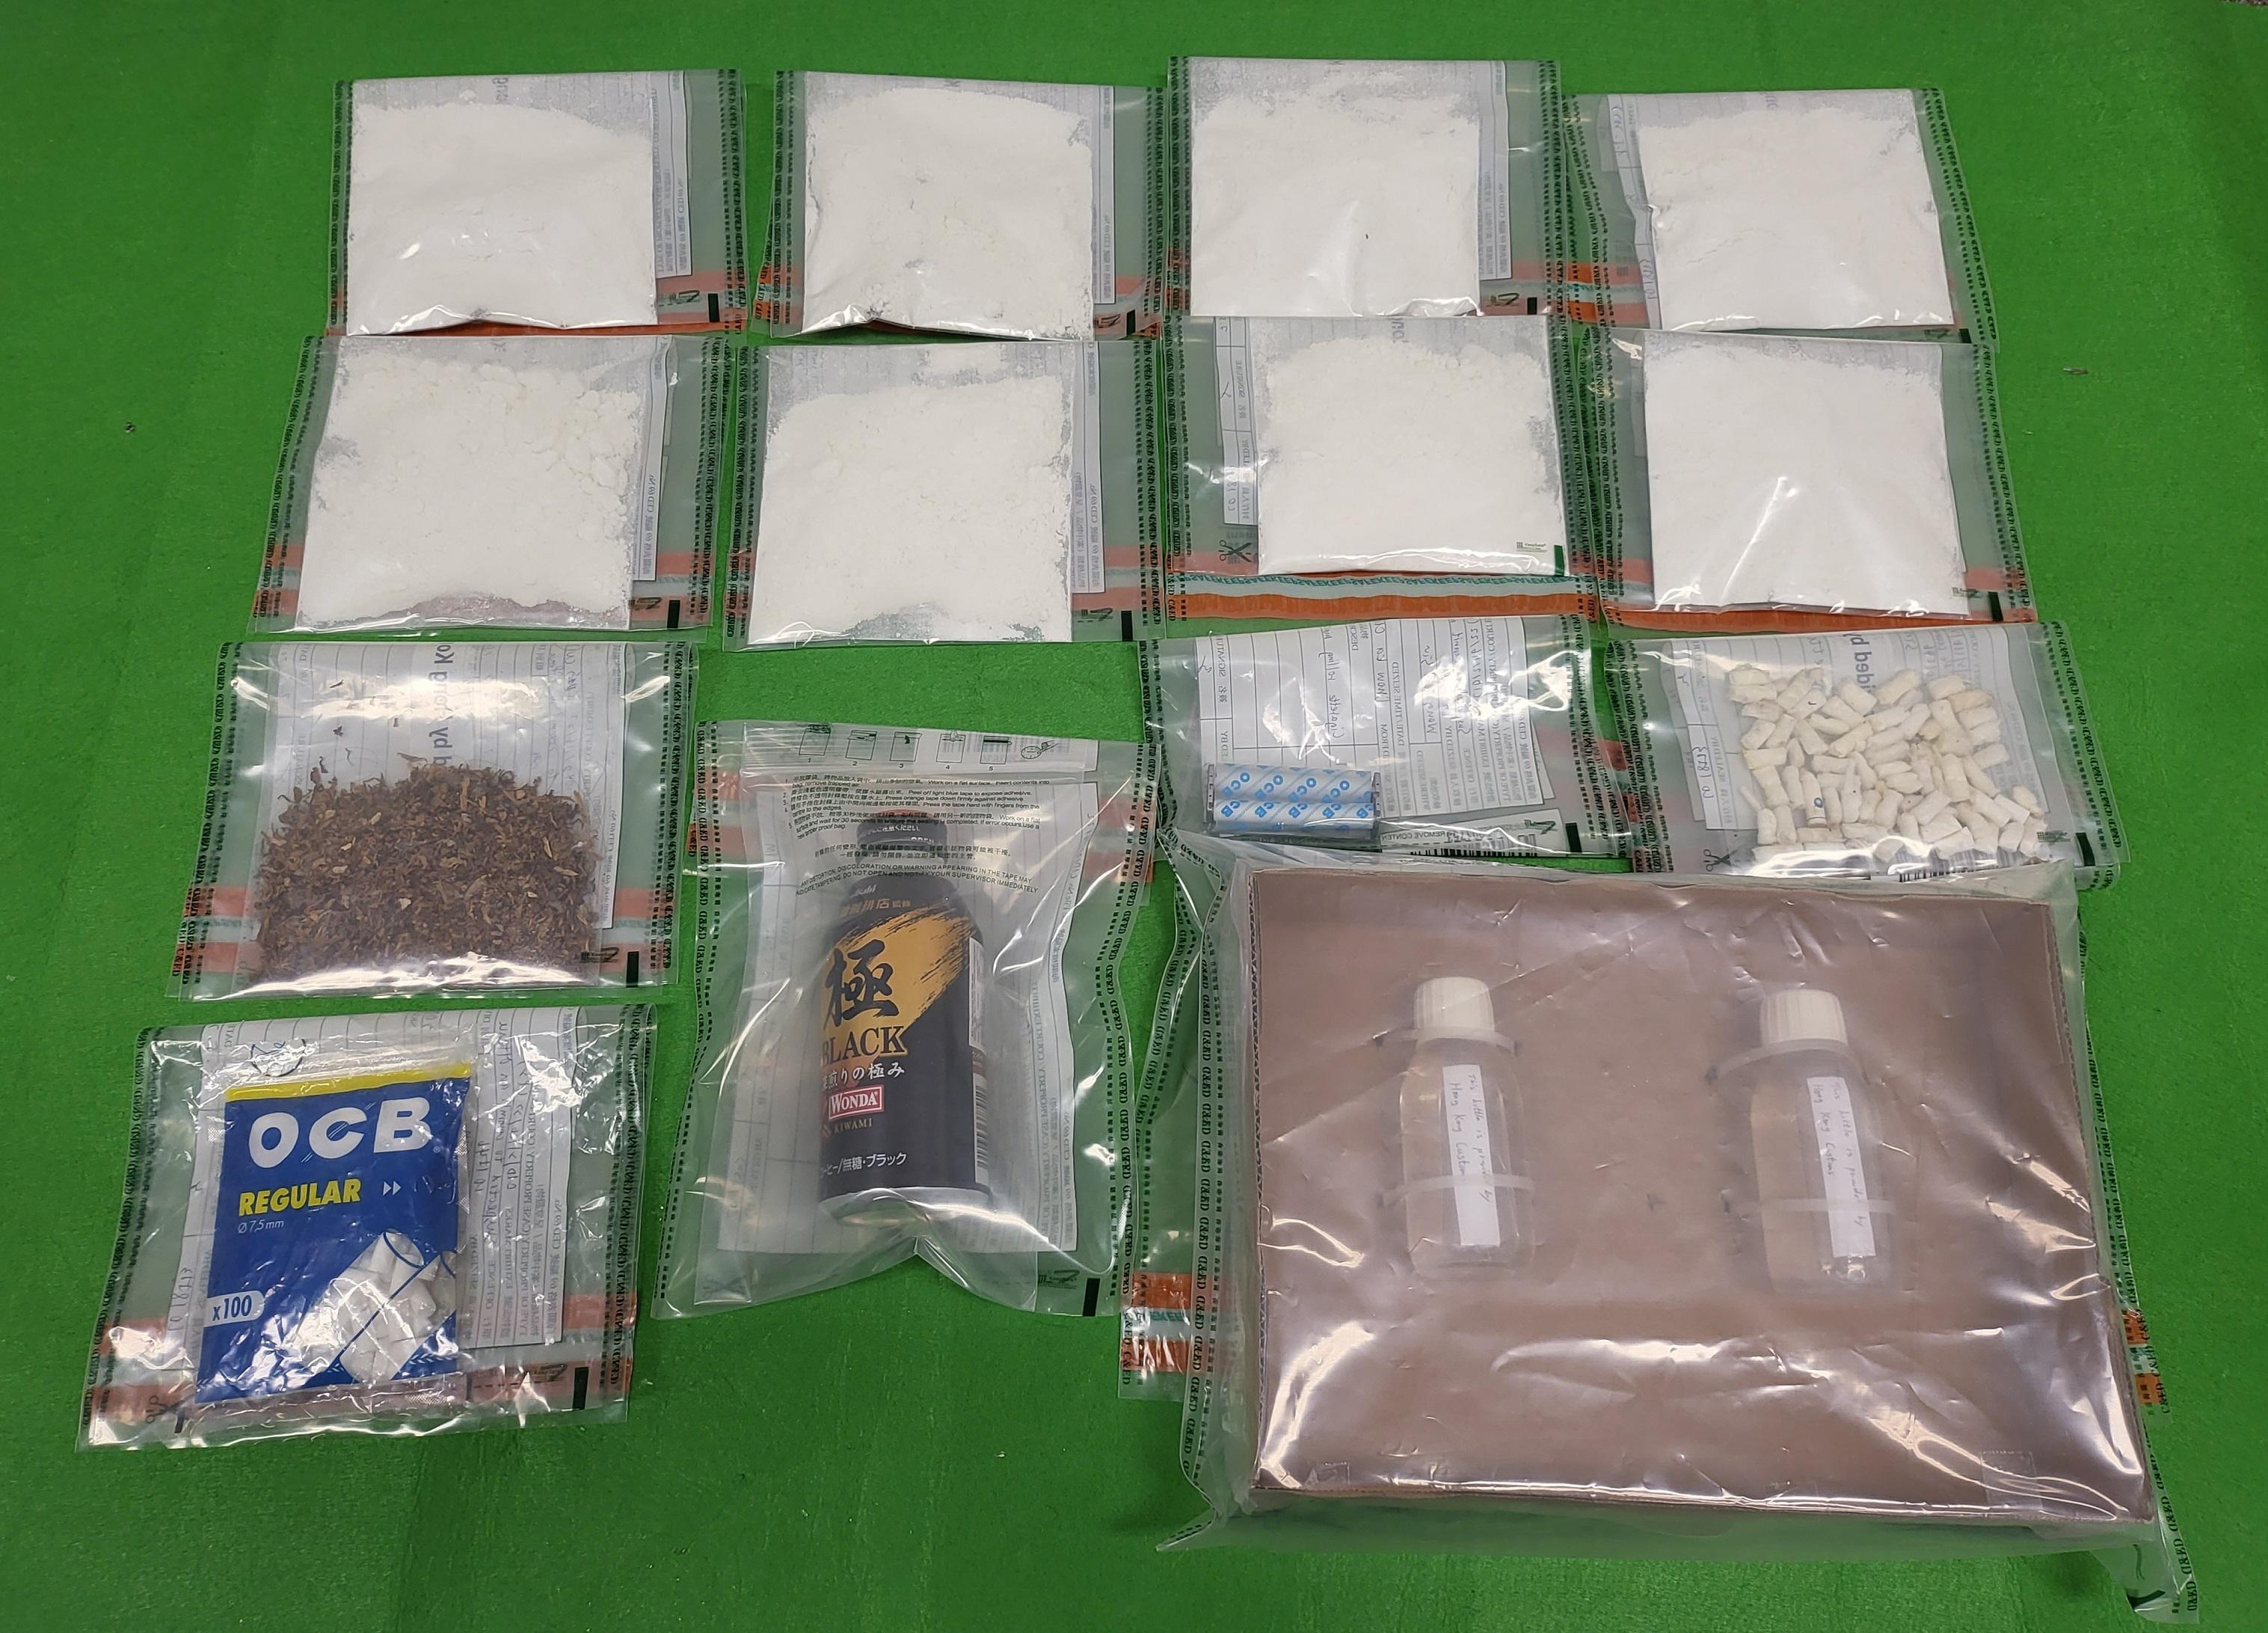 Hong Kong Customs seized about 600 grams of suspected cocaine with an estimated market value of about $660,000 at Hong Kong International Airport on May 5. Customs officers later arrested a man suspected to be connected with the case and further seized a small quantity of suspected cocaine and a set of drug-inhaling apparatus at the arrested man's residence. Photo shows the suspected cocaine and the drug-inhaling apparatus seized.